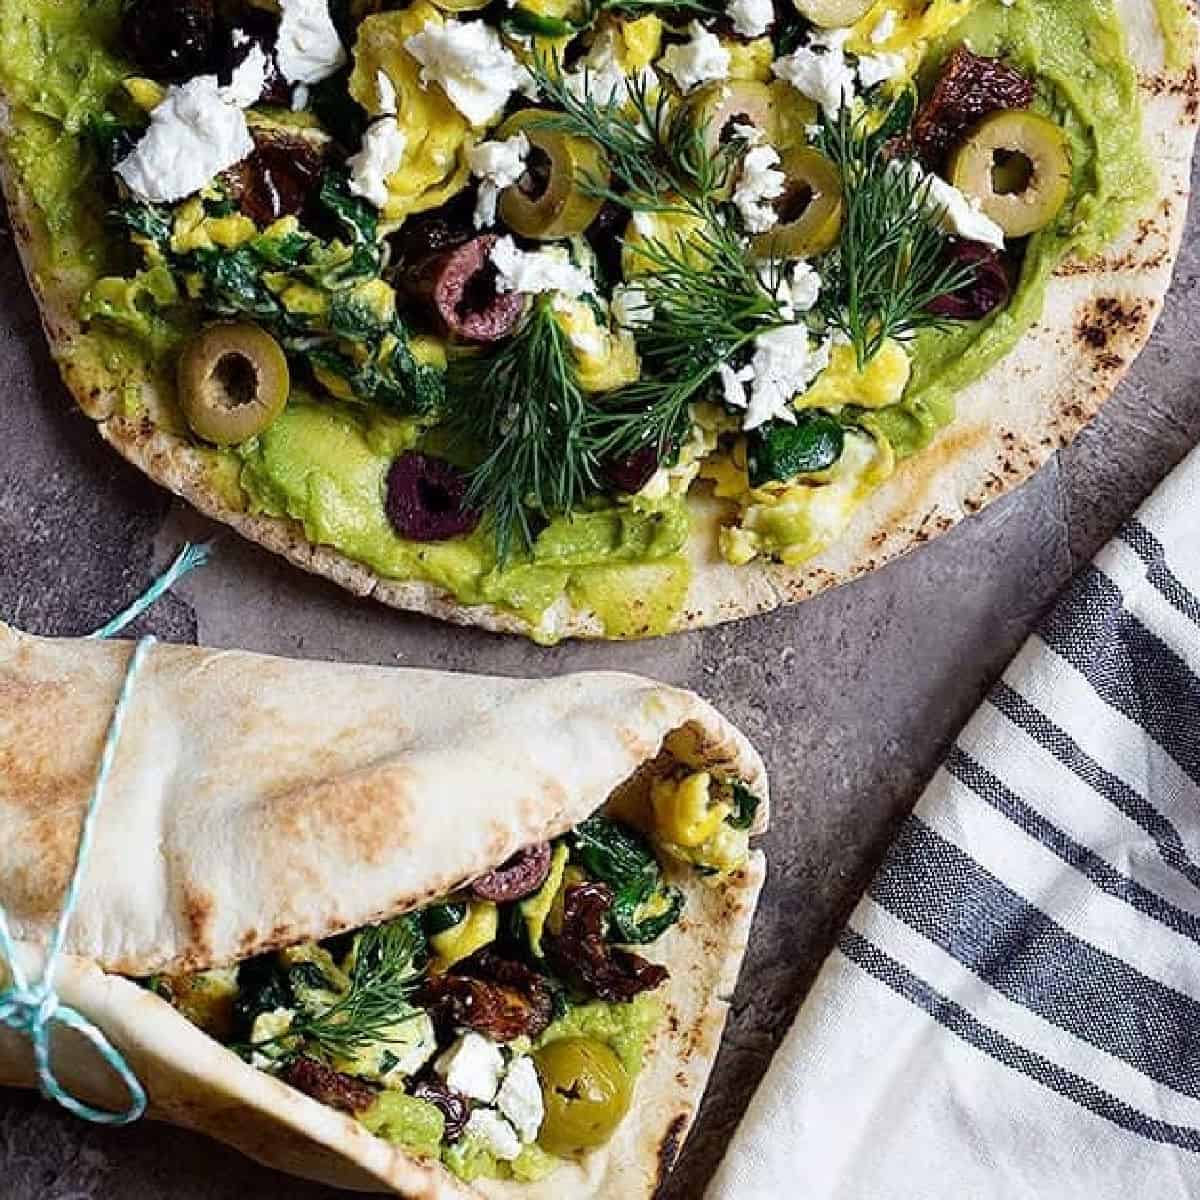 Avocado Egg Sandwich with a Greek twist is ready in 20 minutes and is perfect for breakfast. Avocado and egg wrapped in pita with some olives and feta offers so much flavor in every bite.
